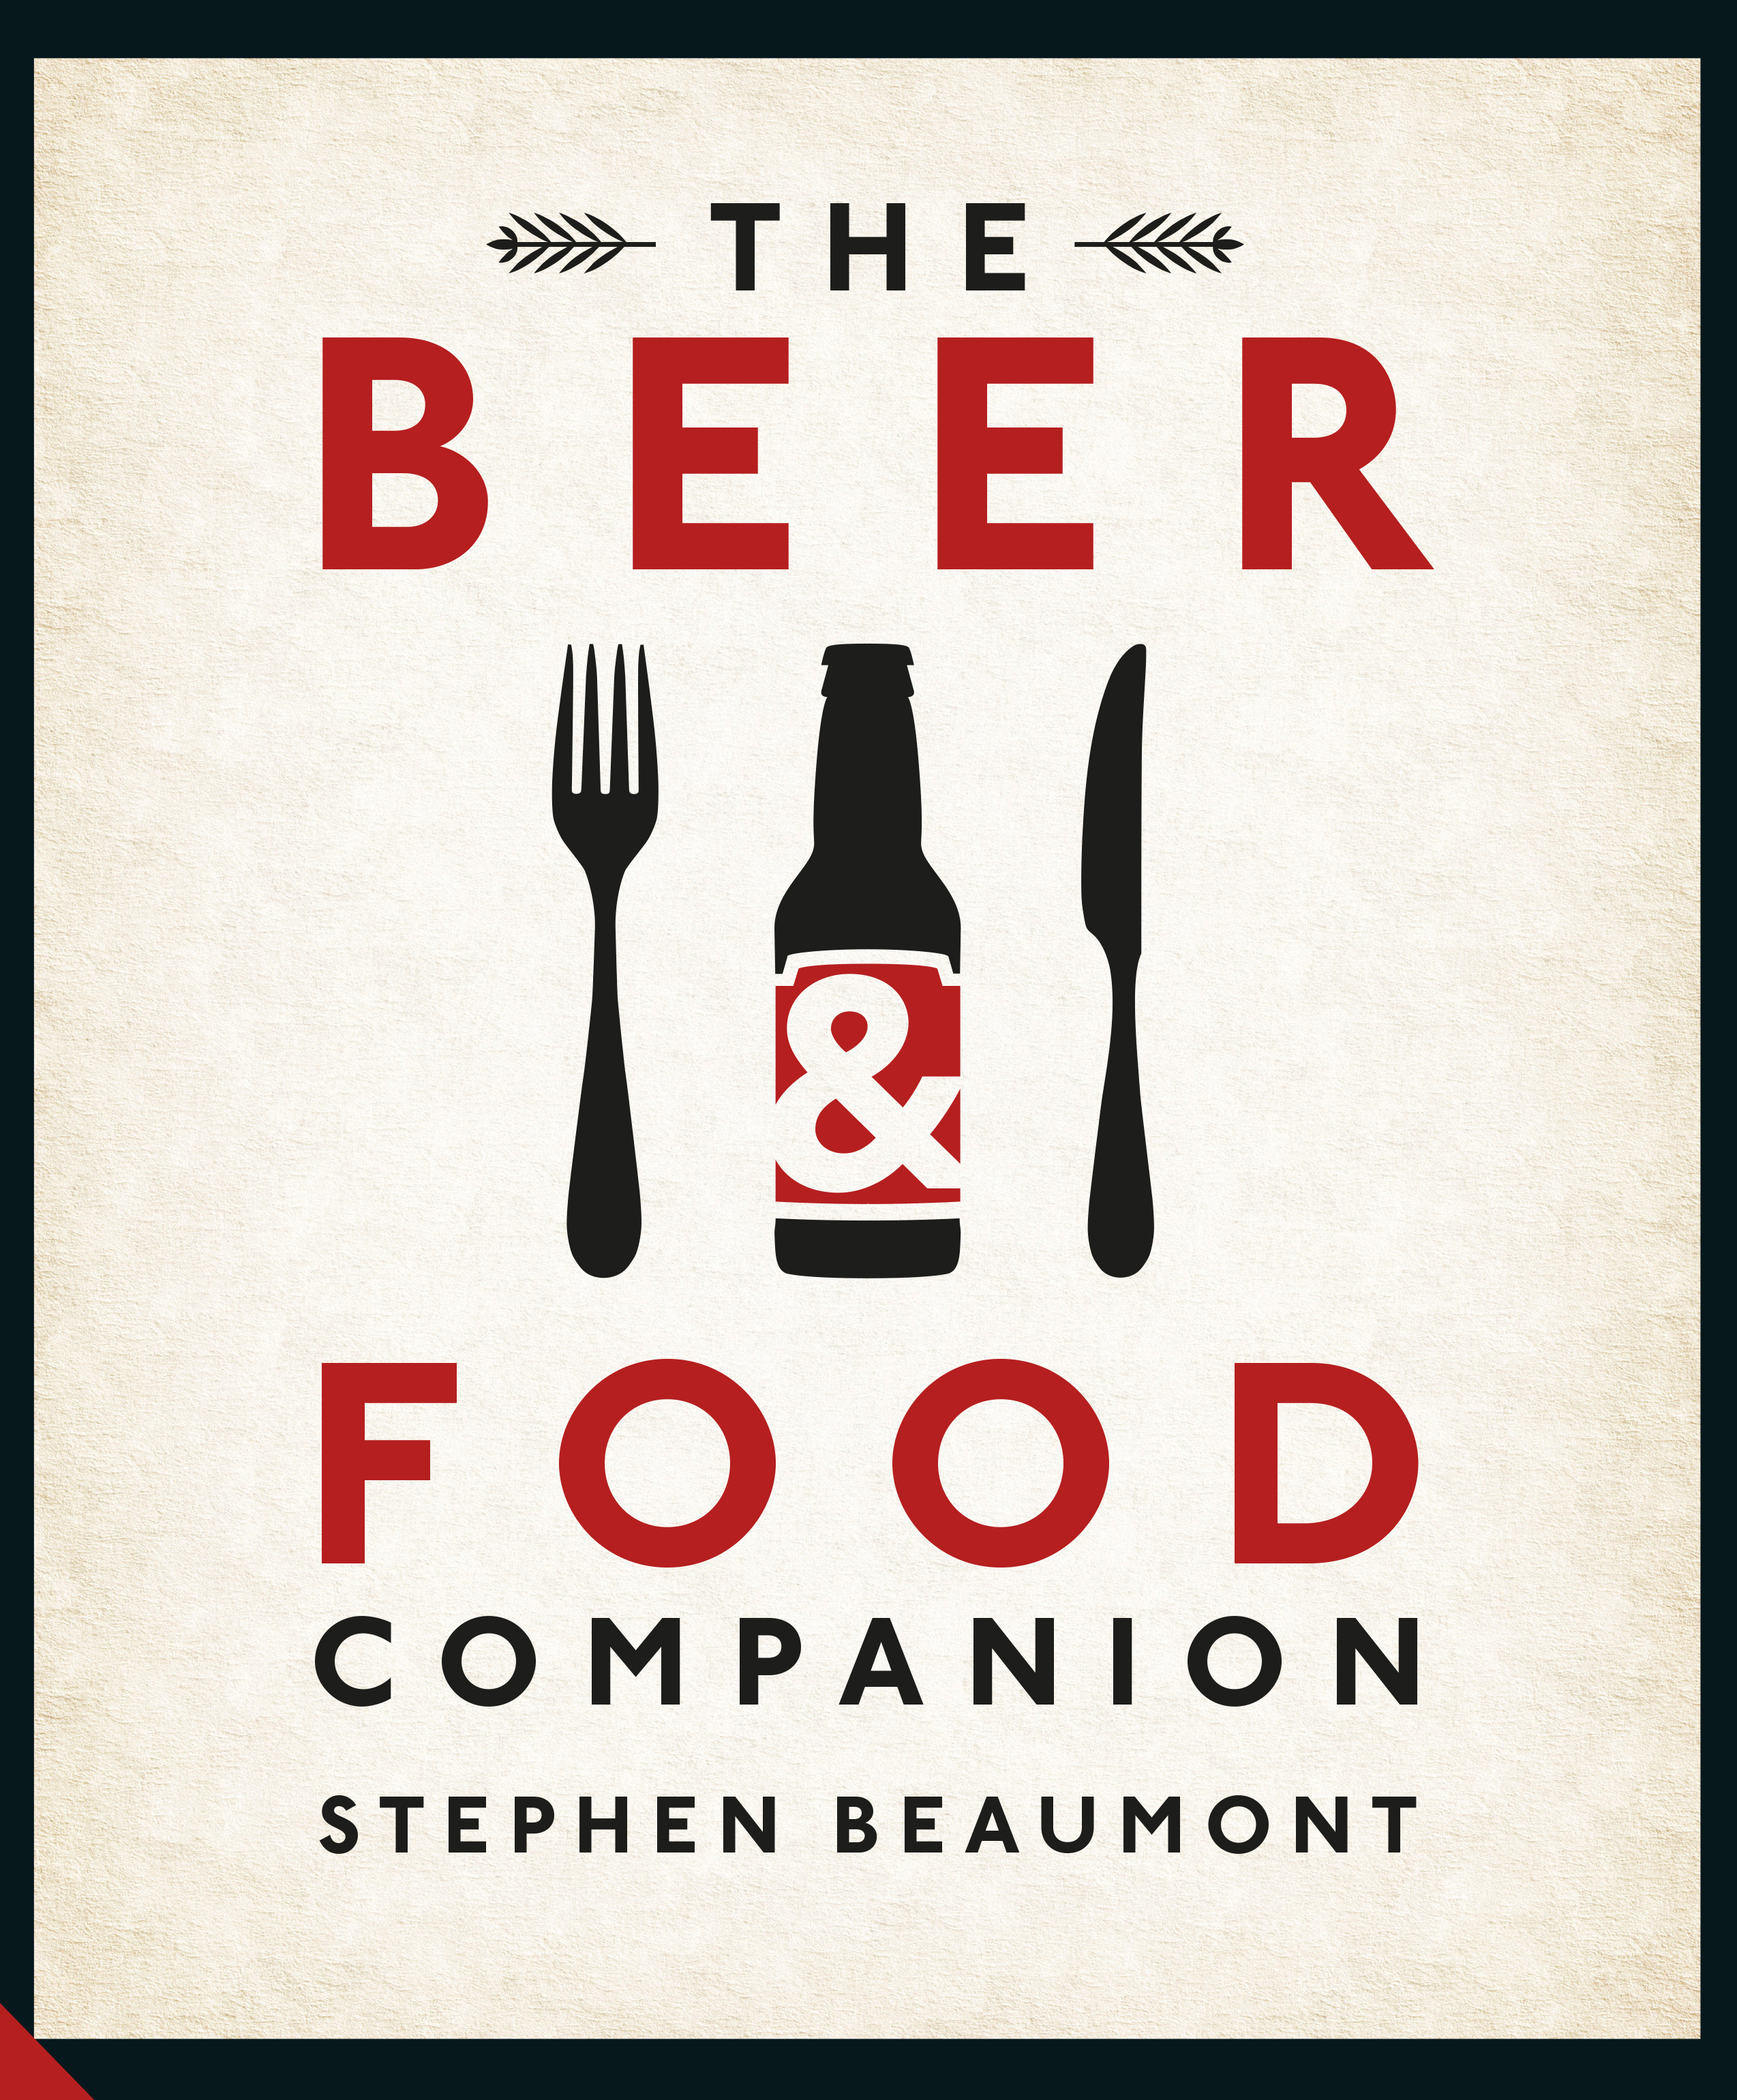 The Beer and Food Companion by Stephen Beaumont